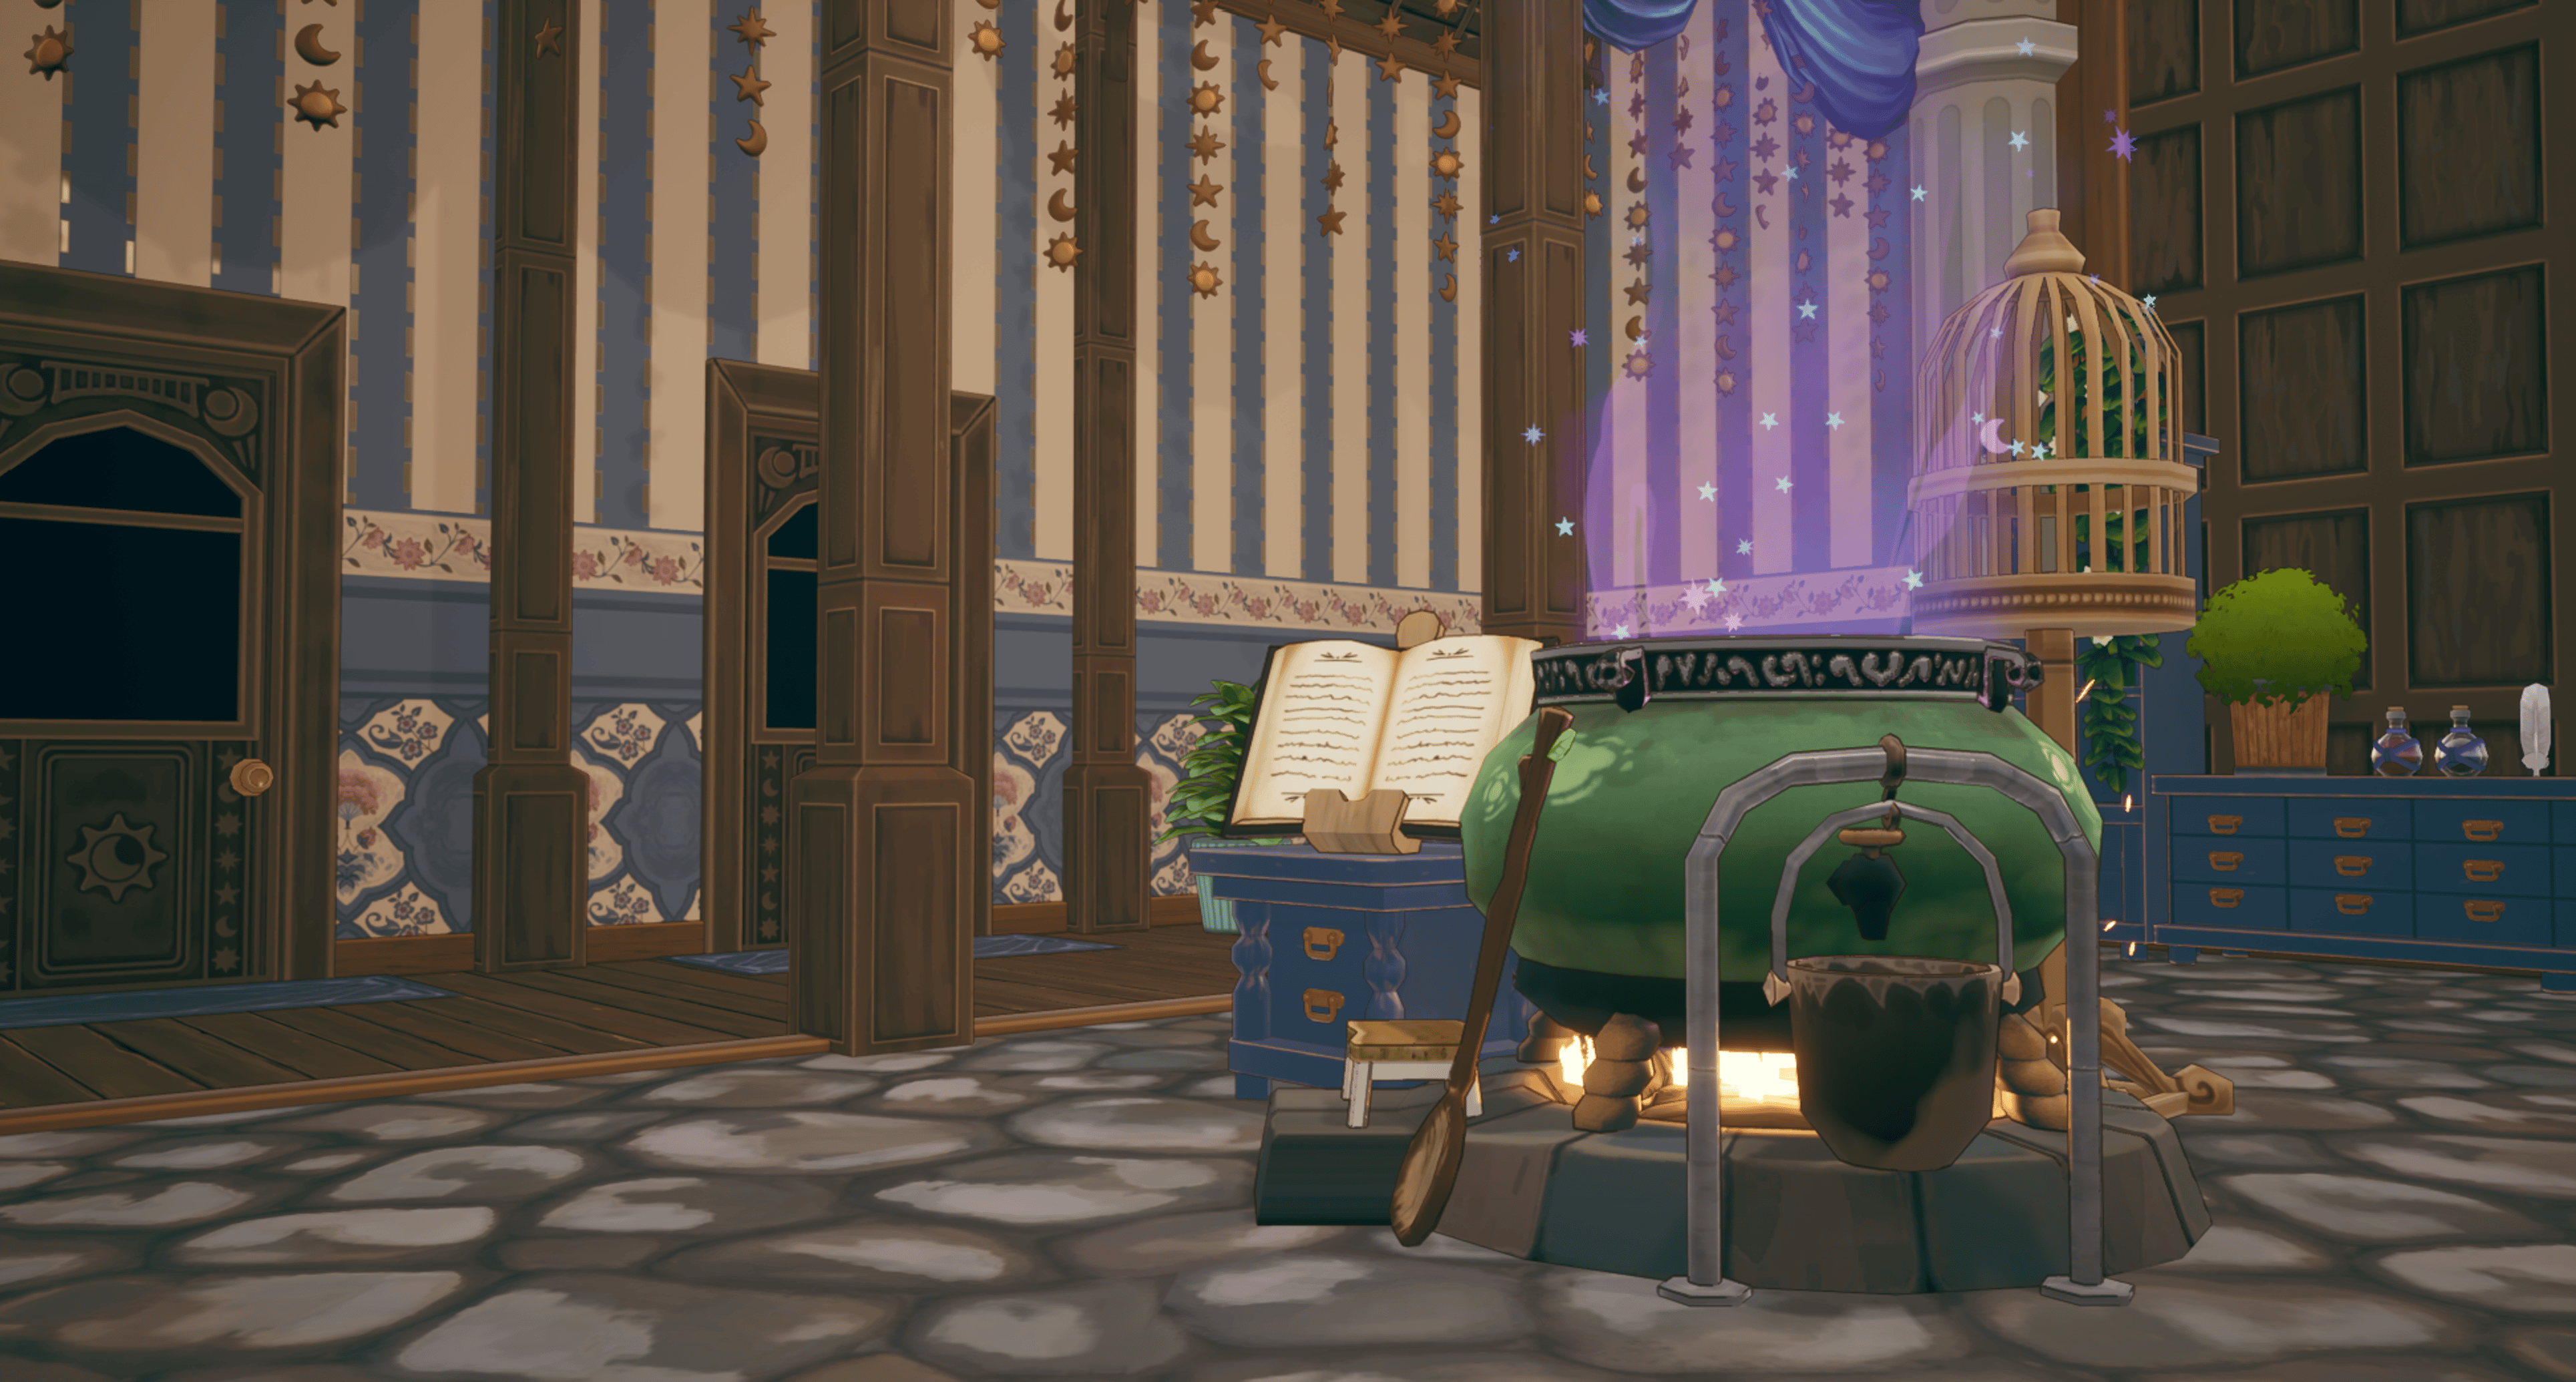 A big green cauldron lets out some purple steam, with glowy stars. An iron vessel is attached to the cauldron, to retrieve its contents. A giant wooden spoon is resting on the cauldron, and an open book sits nearby, on a blue filing cabinet. 